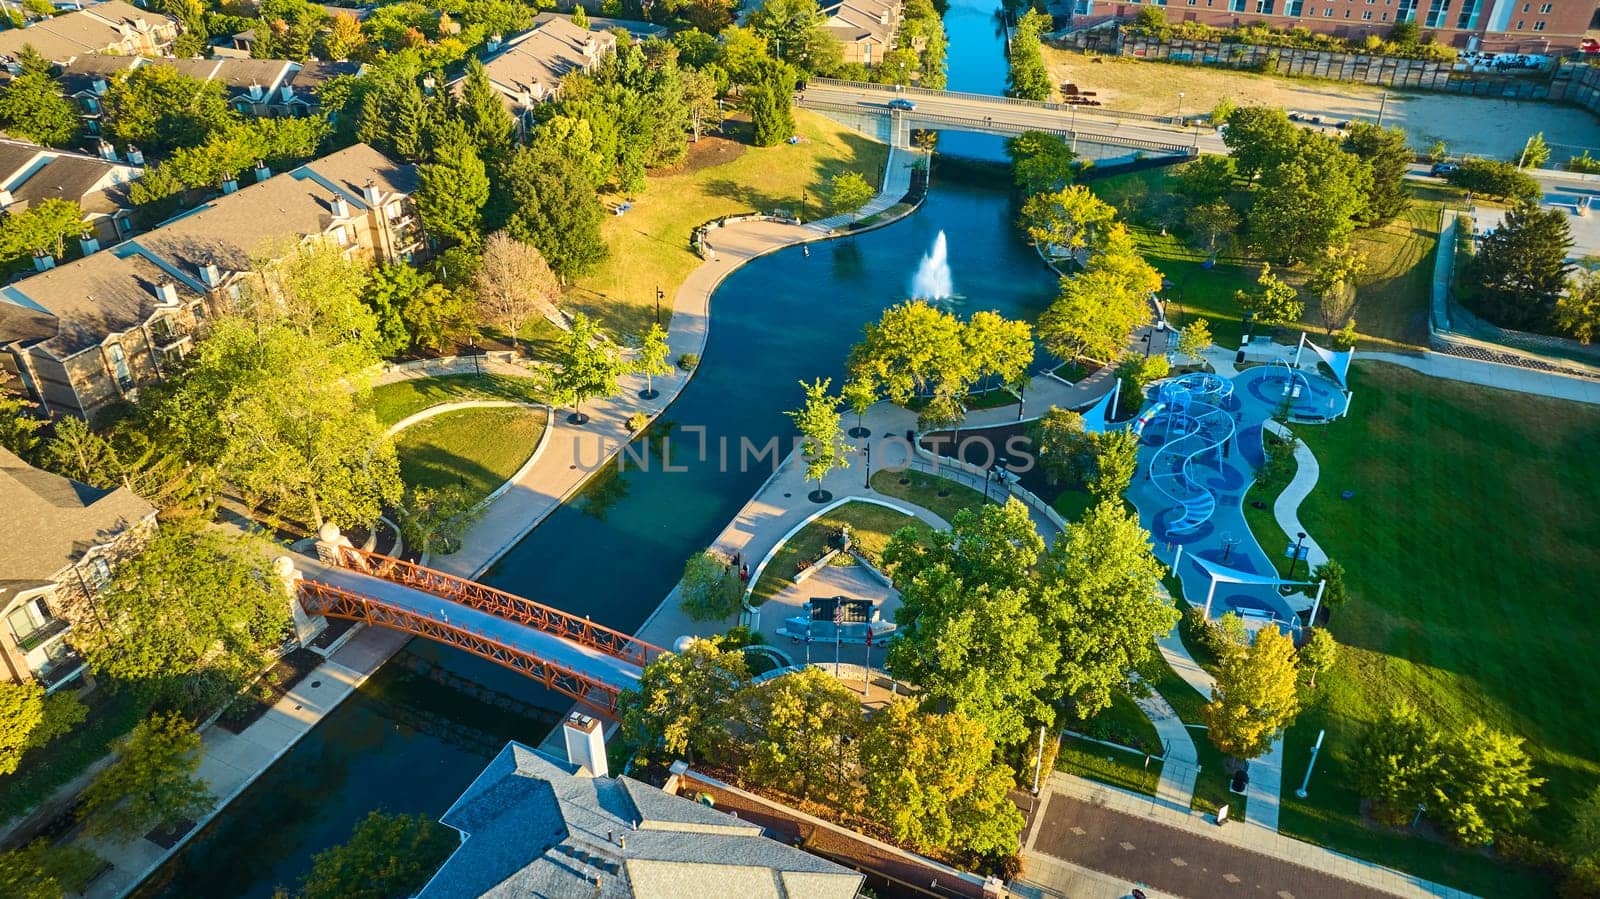 Aerial View of Bustling Suburban Park at Golden Hour in Indianapolis, Featuring River, Playground and Pedestrian Bridge